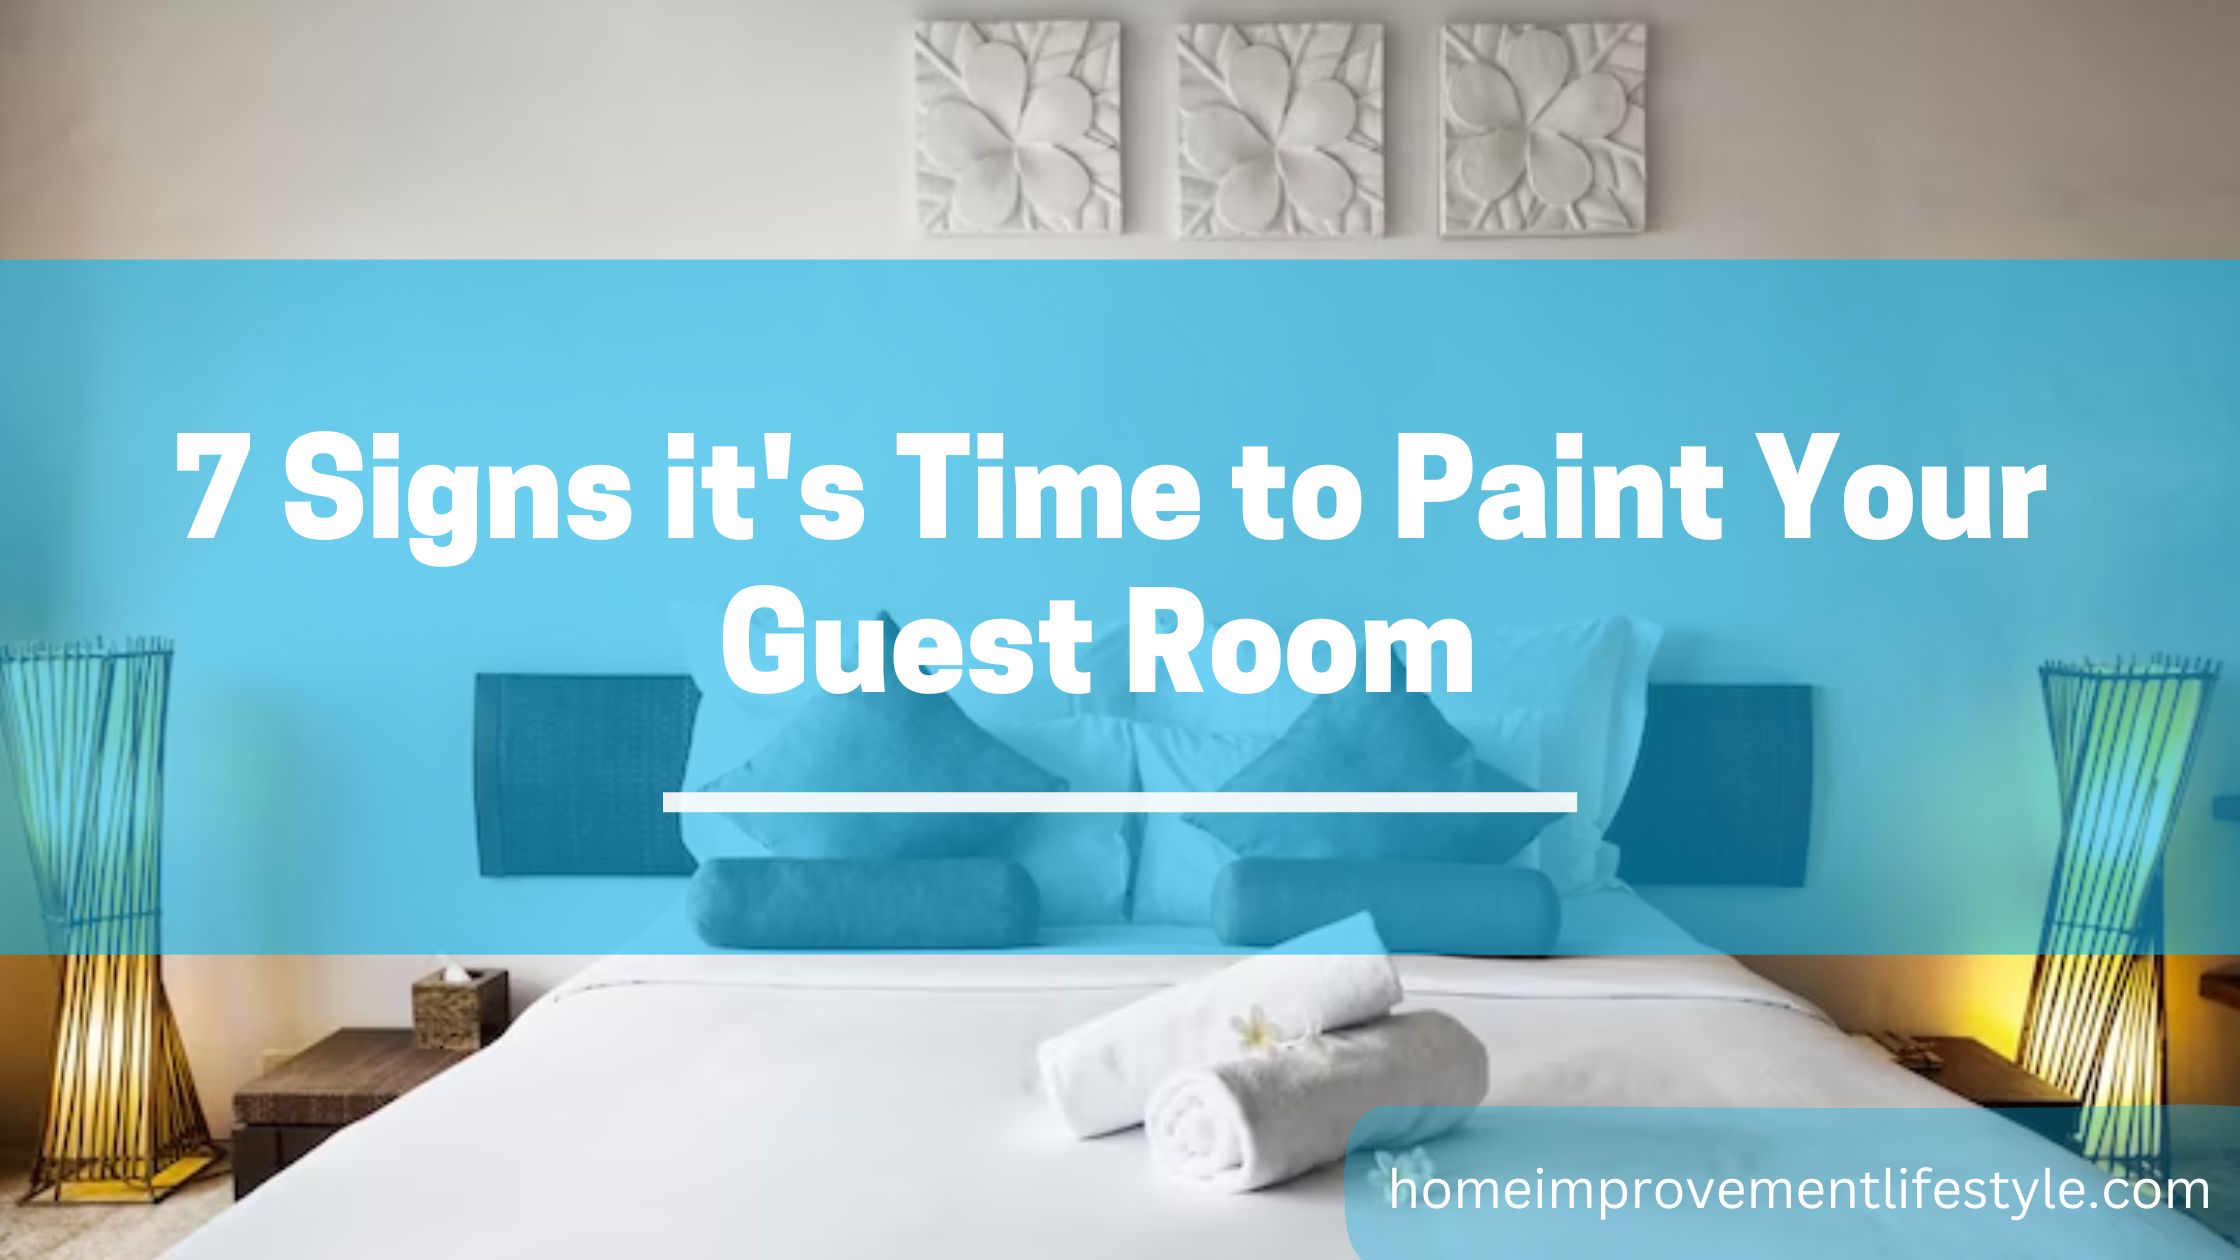 The guest room is perhaps the showpiece of your home in many ways. It speaks about your way of living, aesthetics, and quality of life. So